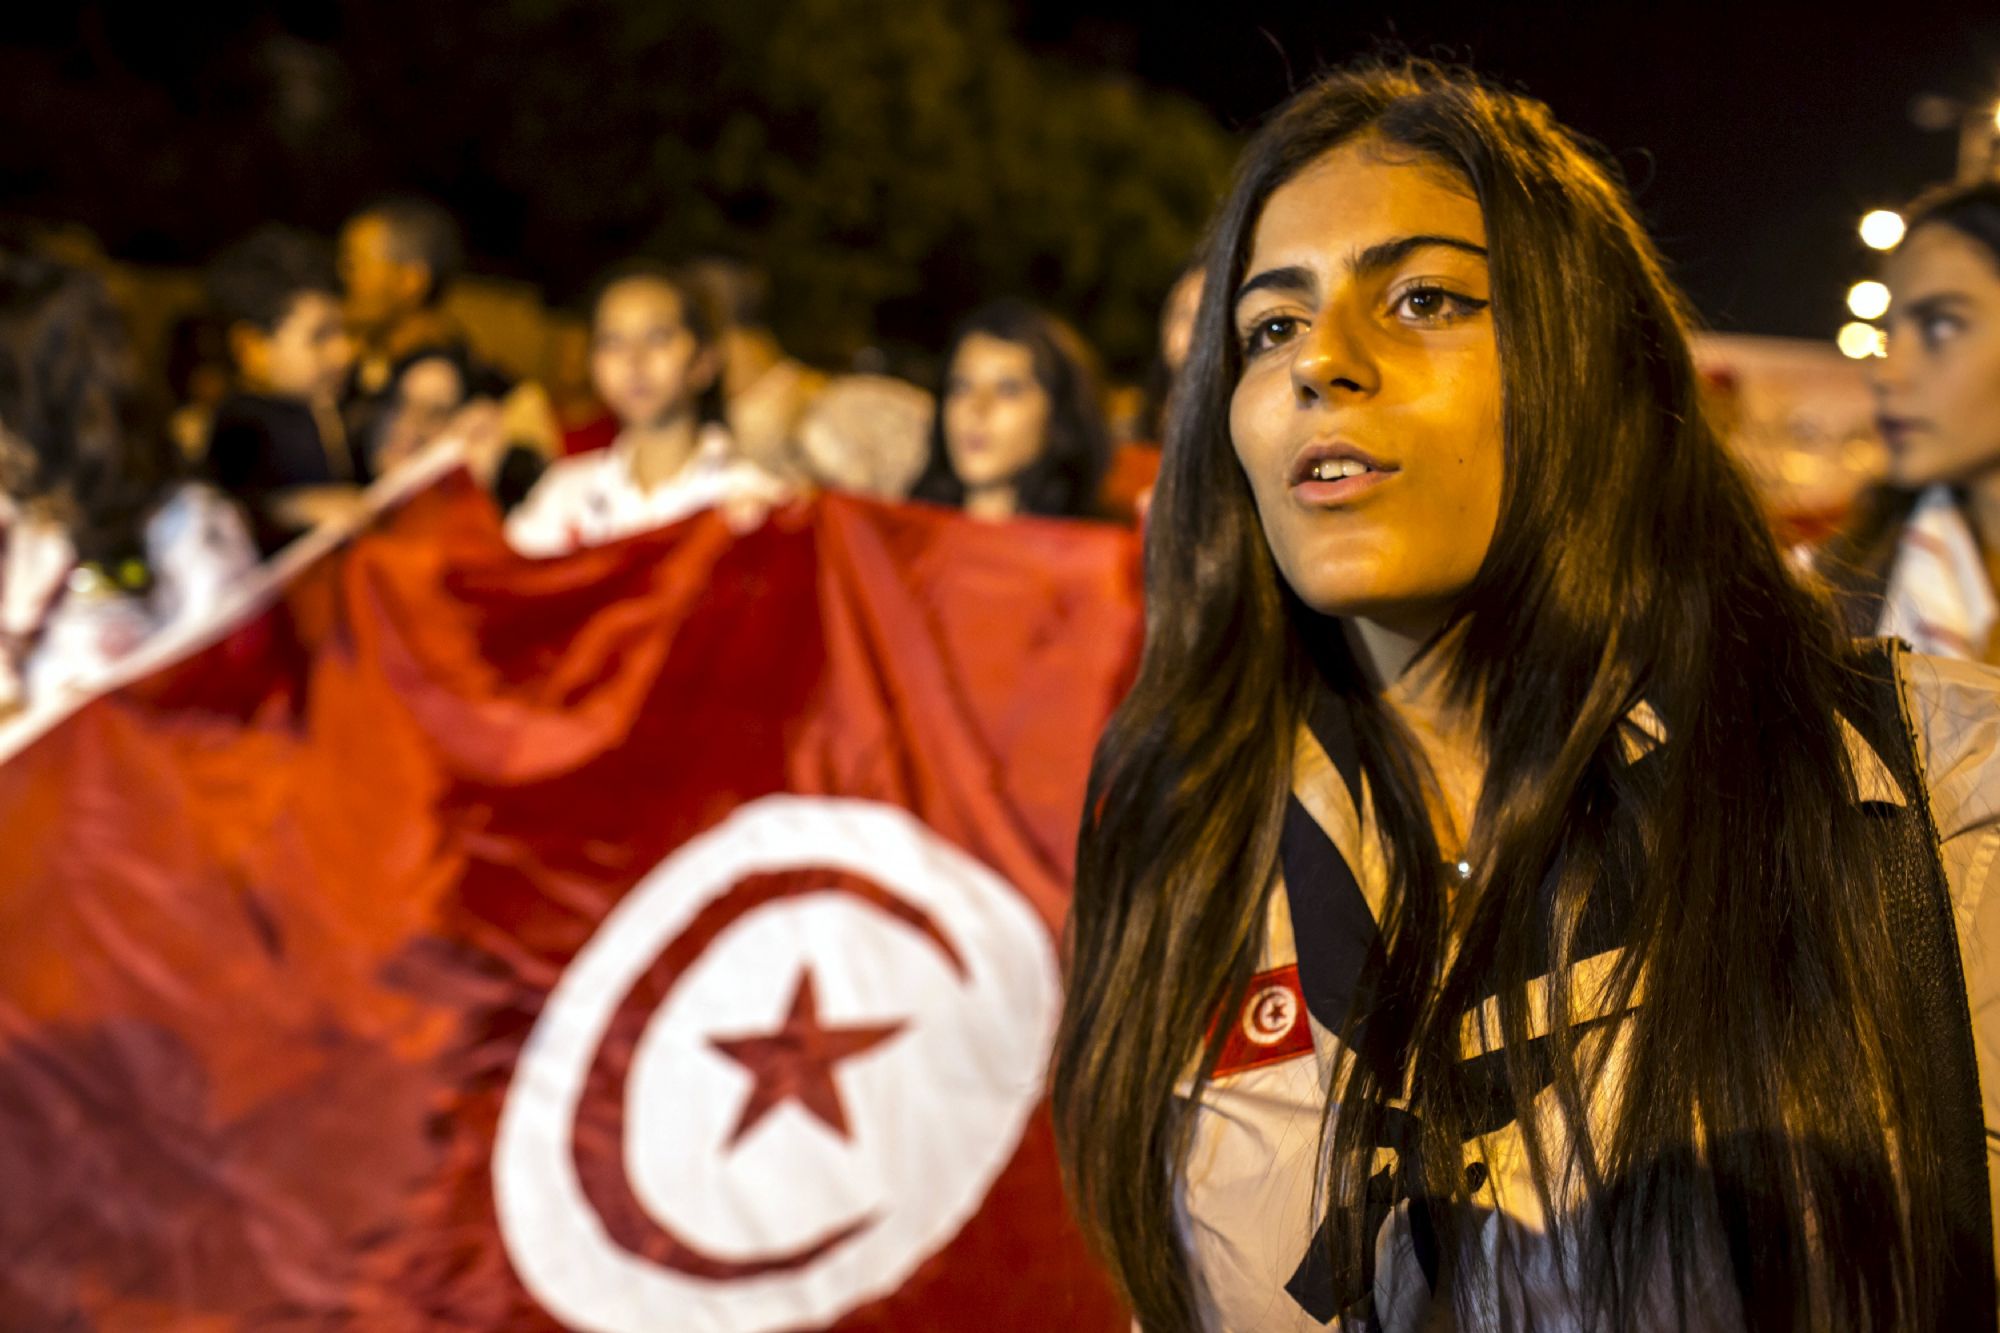 Tunisia is considered a pioneer on women's rights in the Arab world